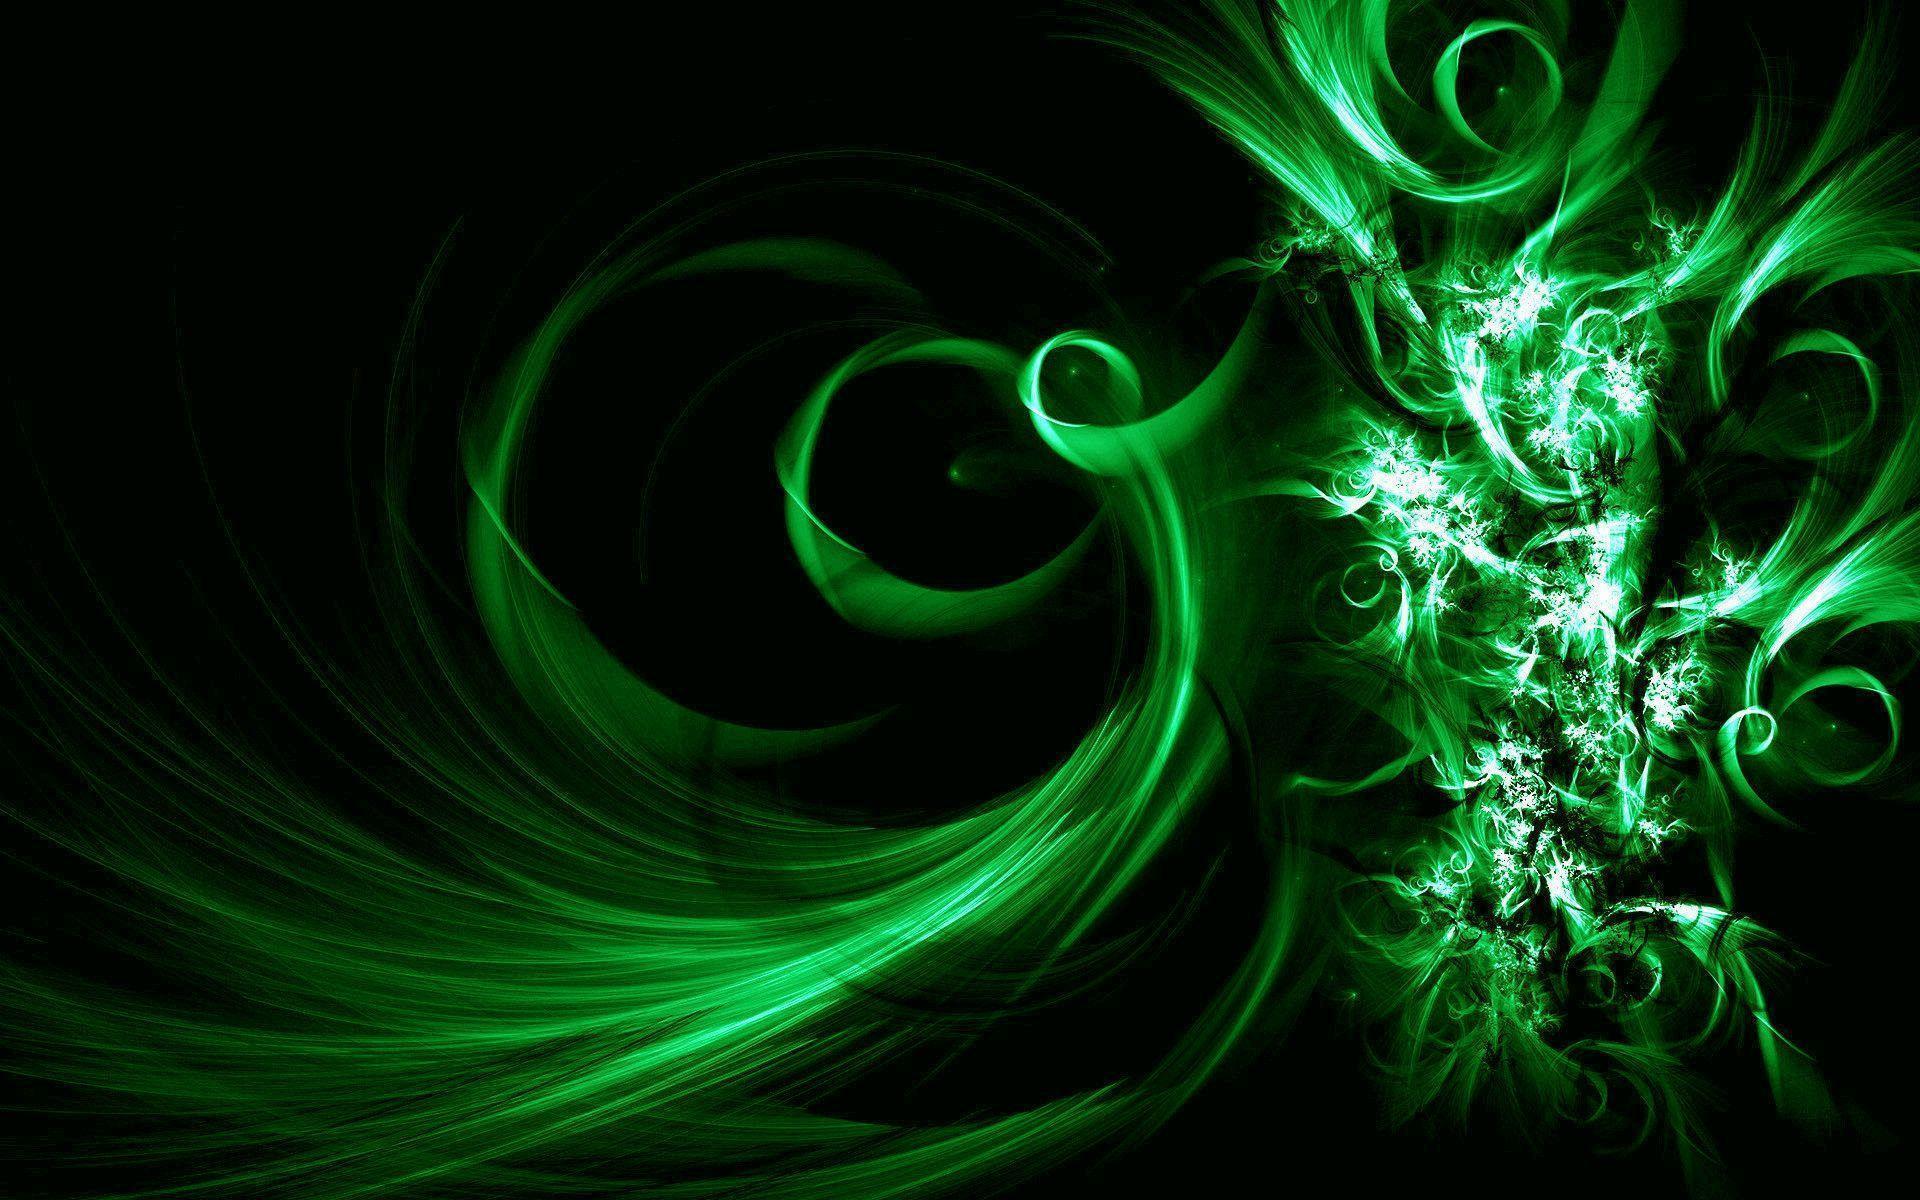 Black And Green Backgrounds - Wallpaper Cave